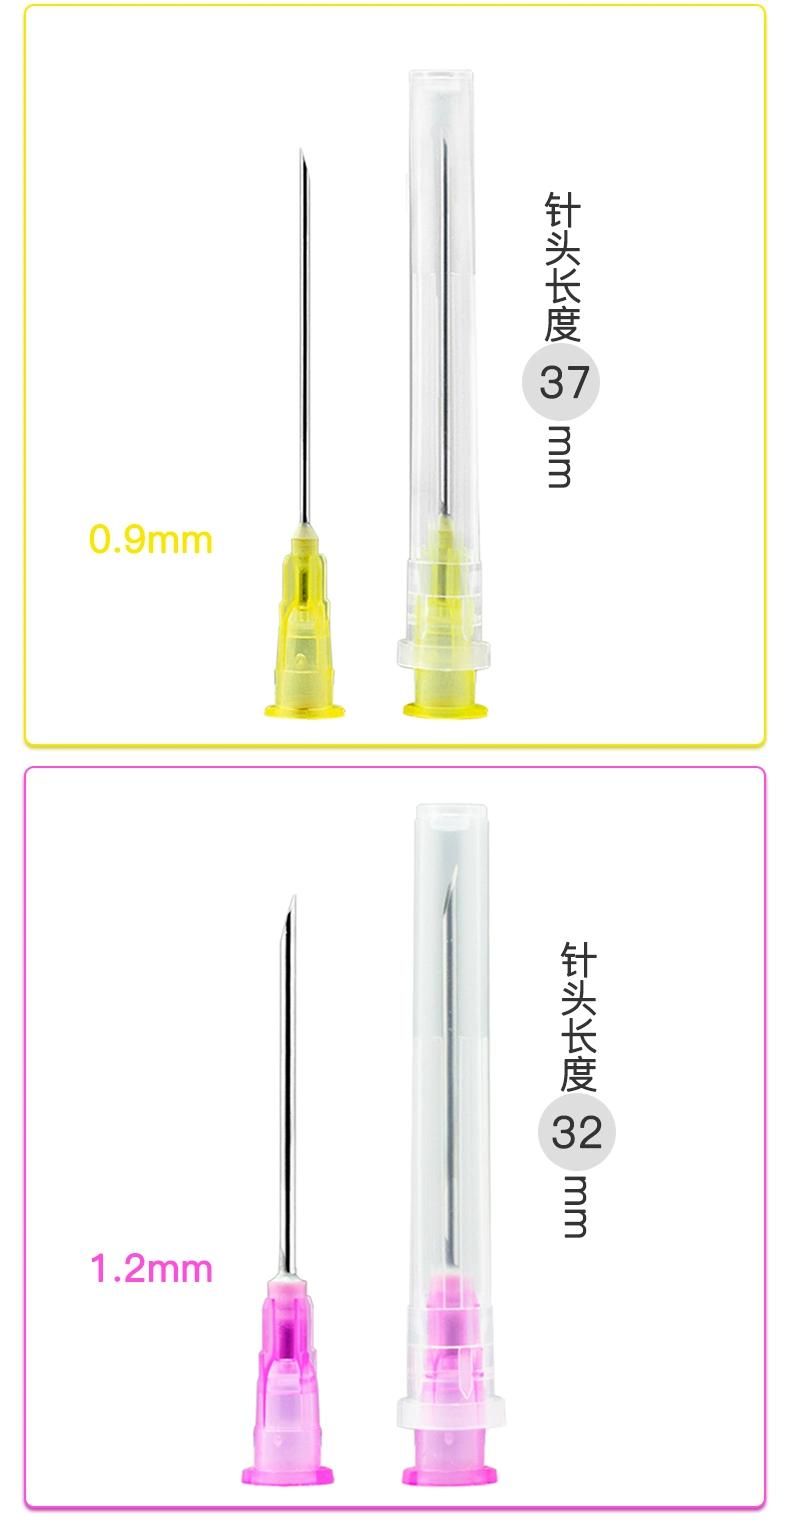 Disposable Medical Sterile Injection Needle 1.2mm*32mm Medical Syringe Needle Needle Device